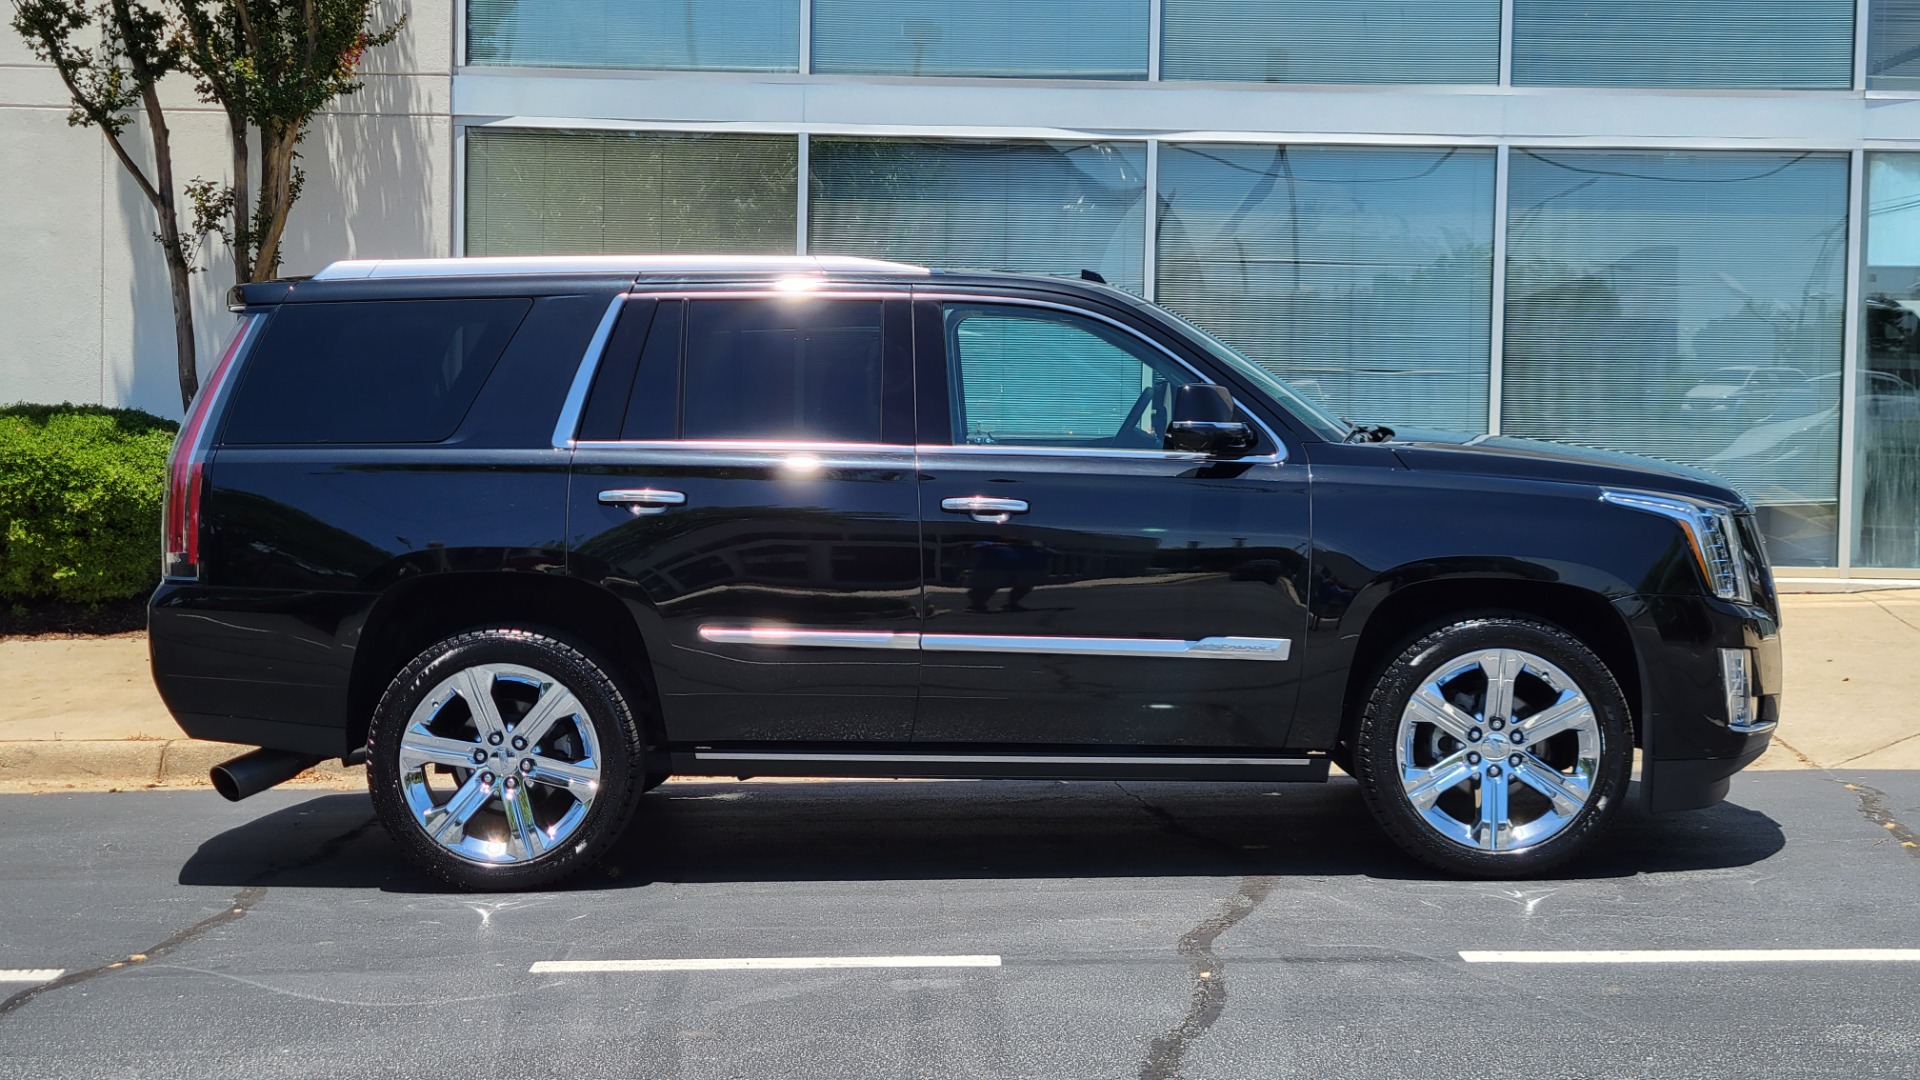 Used 2016 Cadillac ESCALADE PREMIUM COLLECTION / 6.2L / 4X4 / NAV / DVD / SUNROOF / 3-ROW for sale $58,995 at Formula Imports in Charlotte NC 28227 6